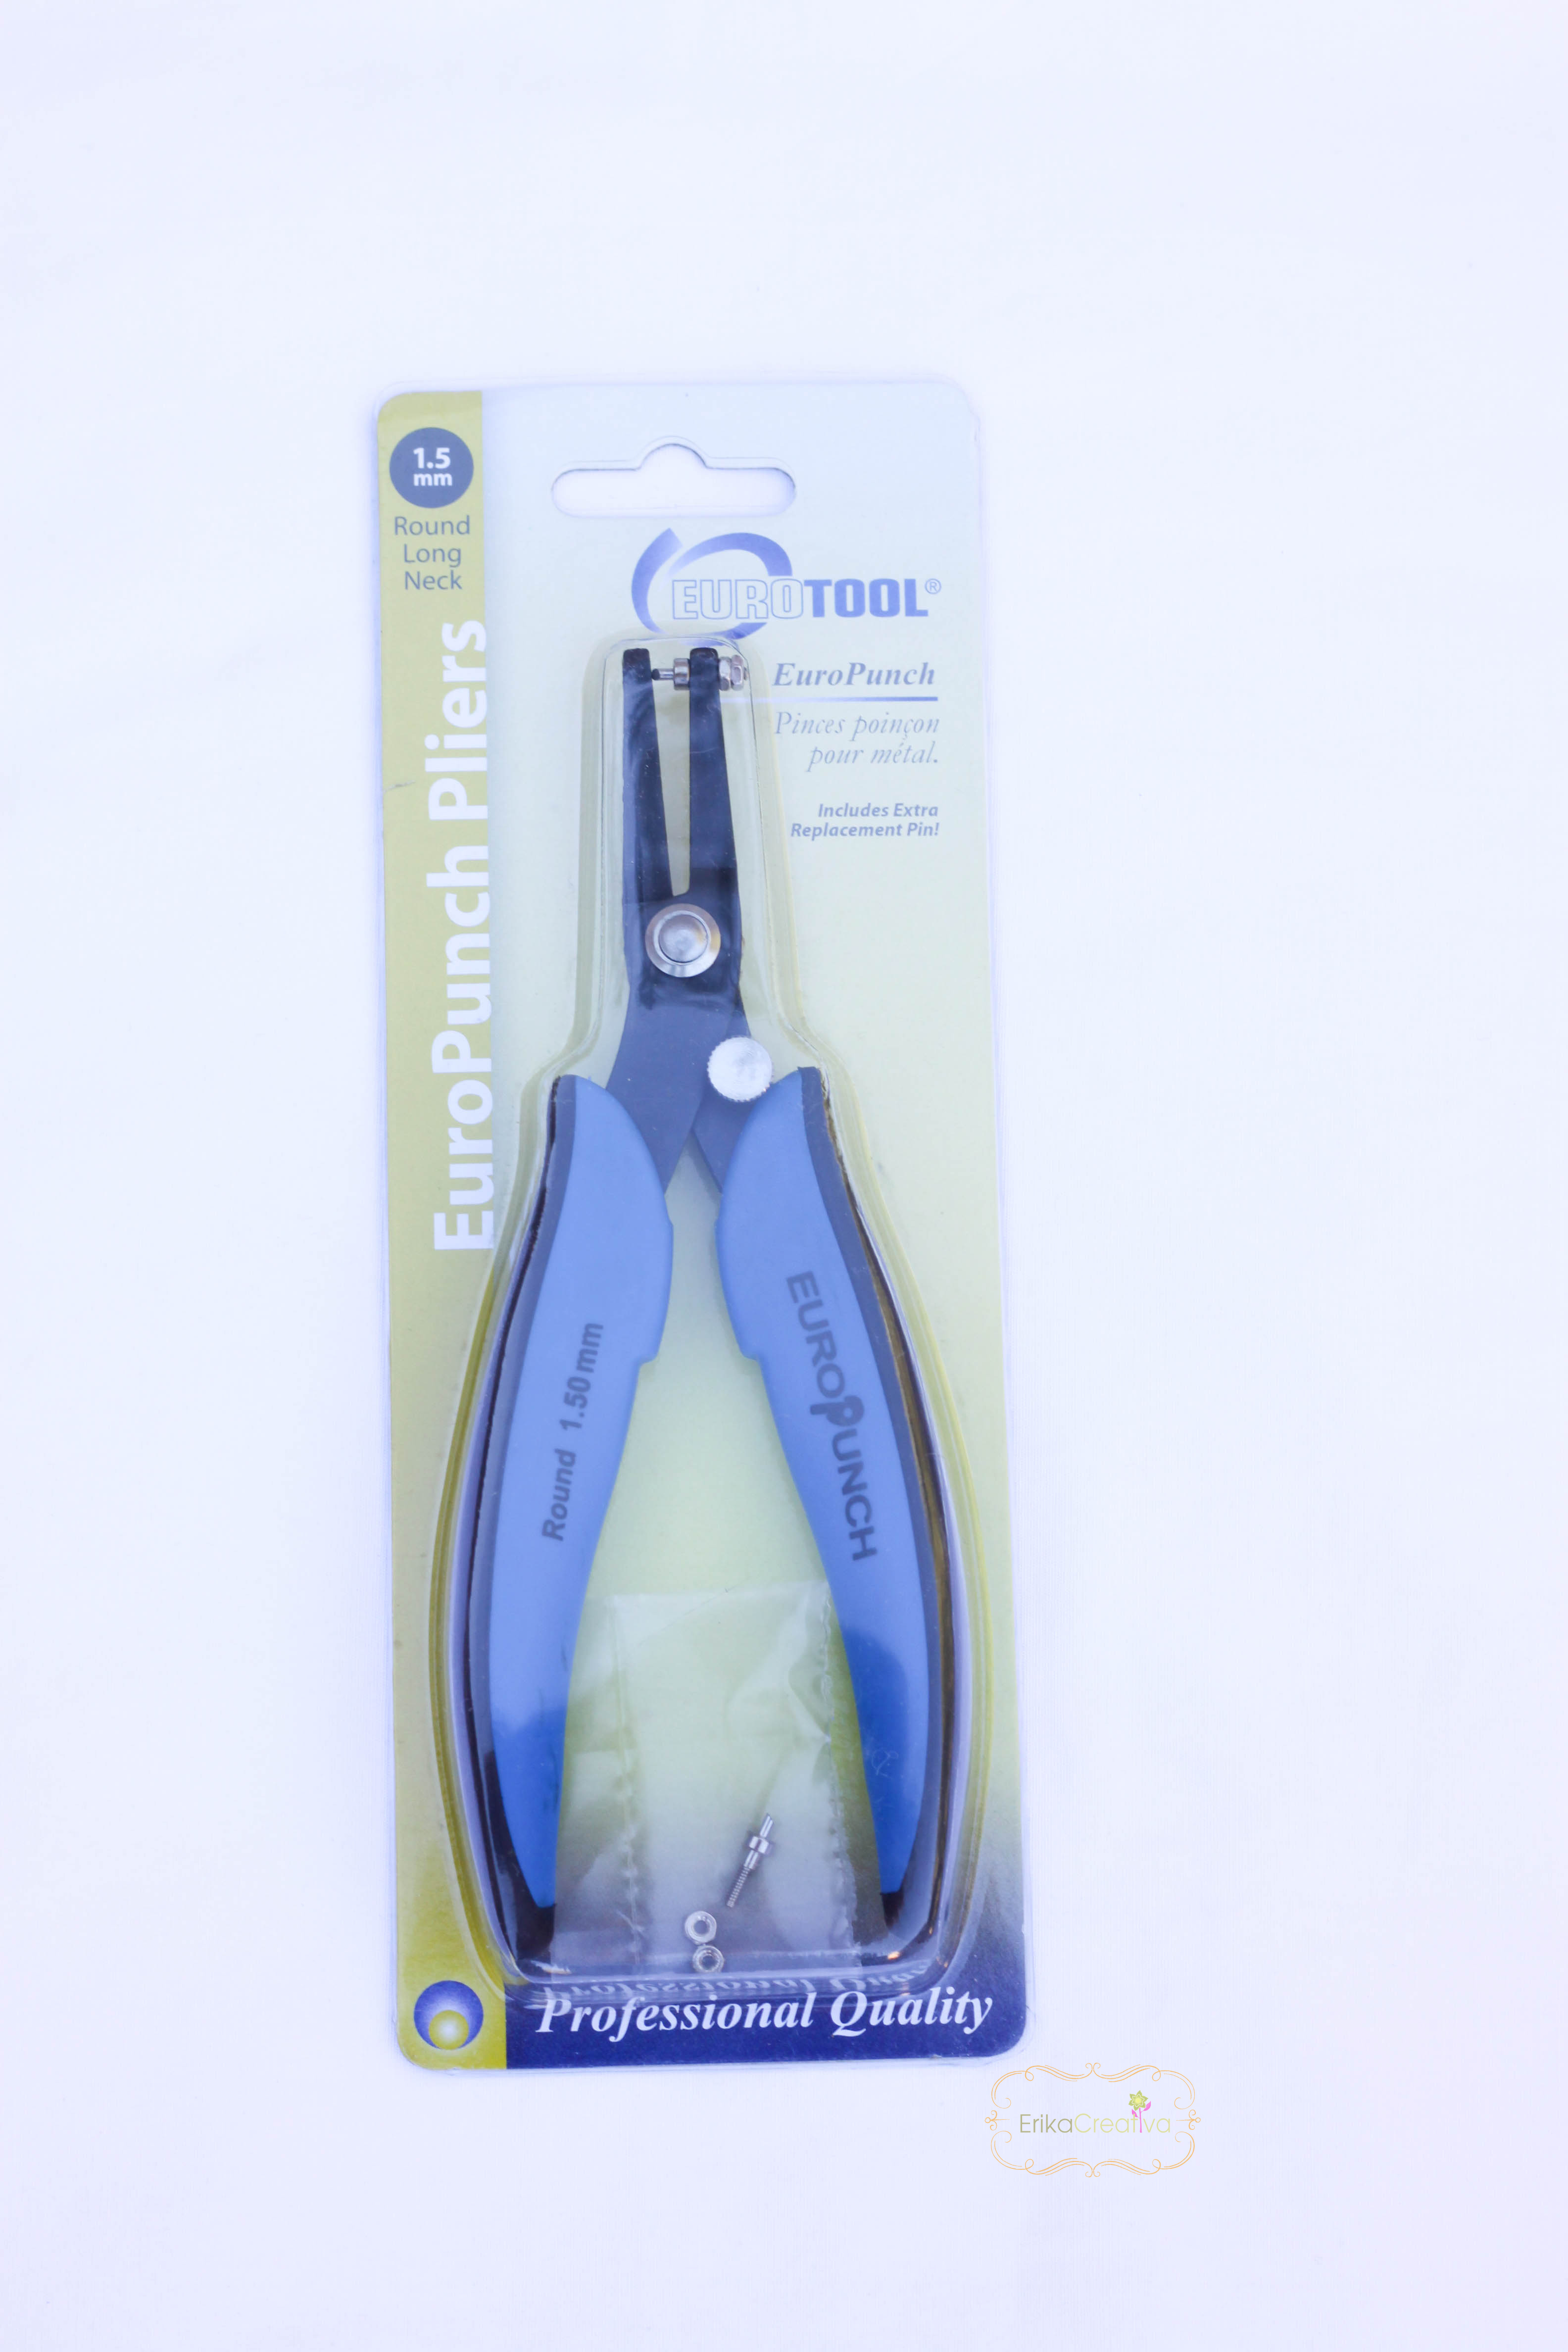 Replacement Pins, Metal Hole Punch Pliers, 1.5mm hole, 5 pack